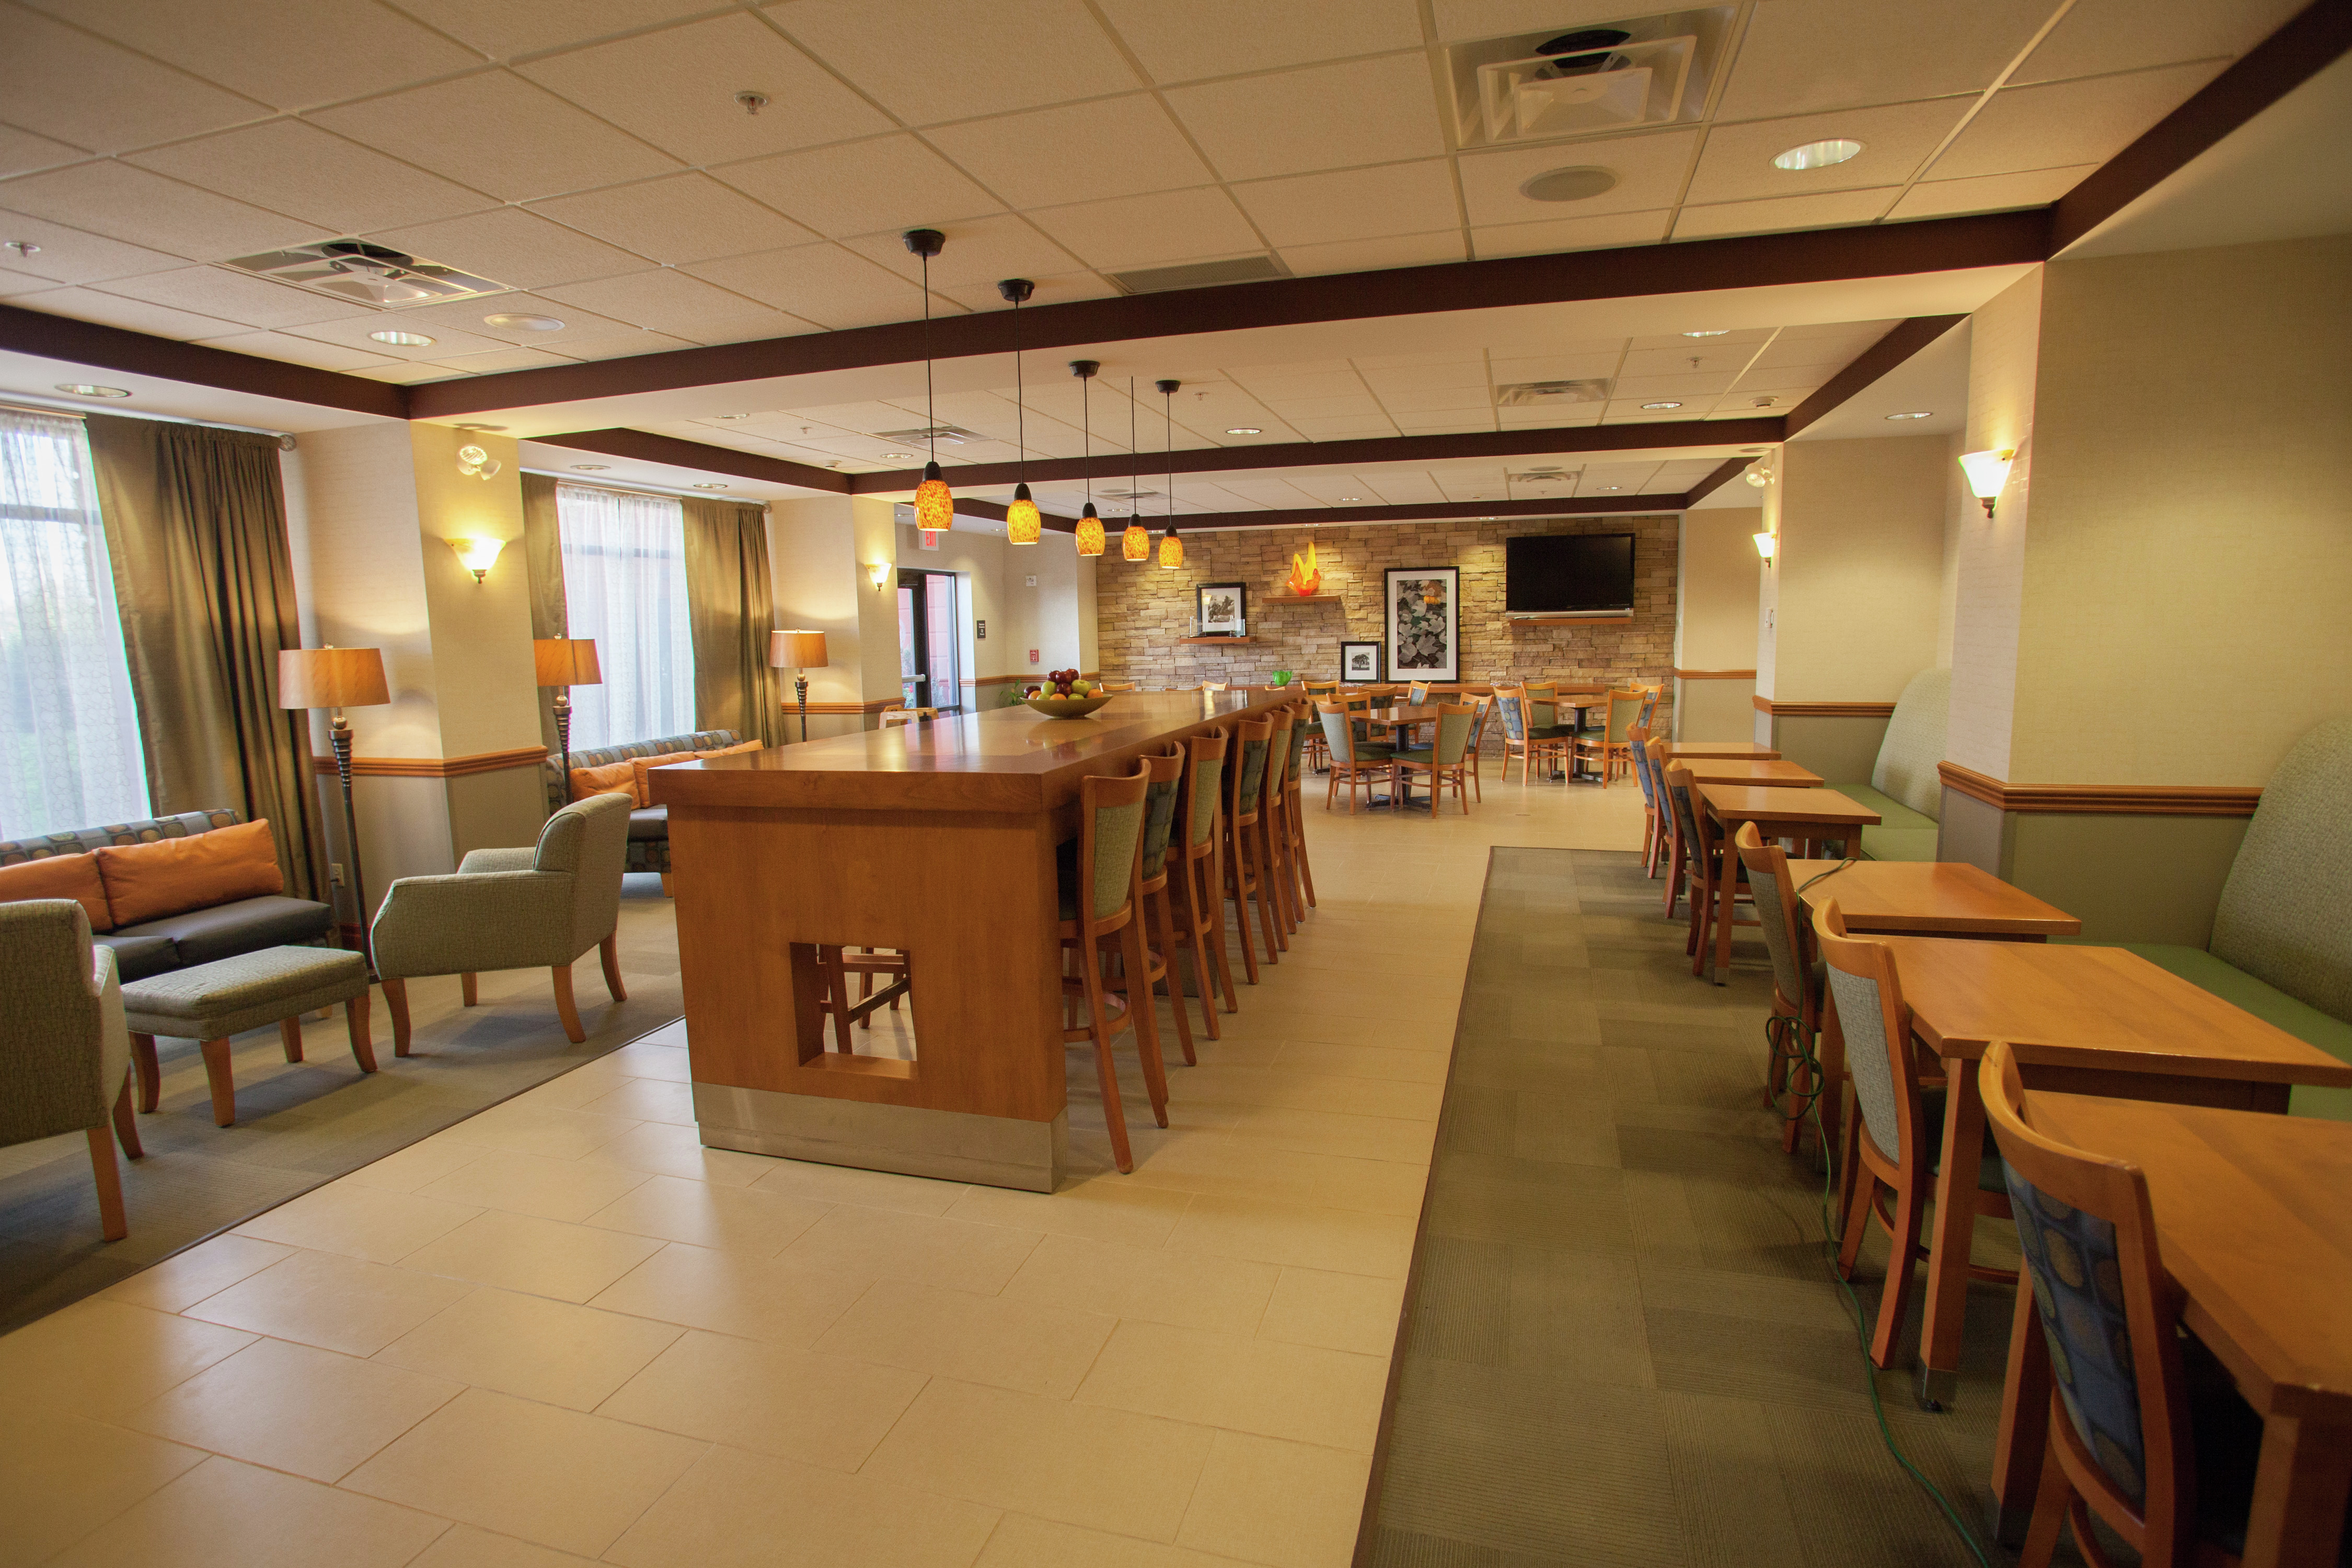 Dining Tables, Community Table, and Chairs in Breakfast Dining Area in Lobby